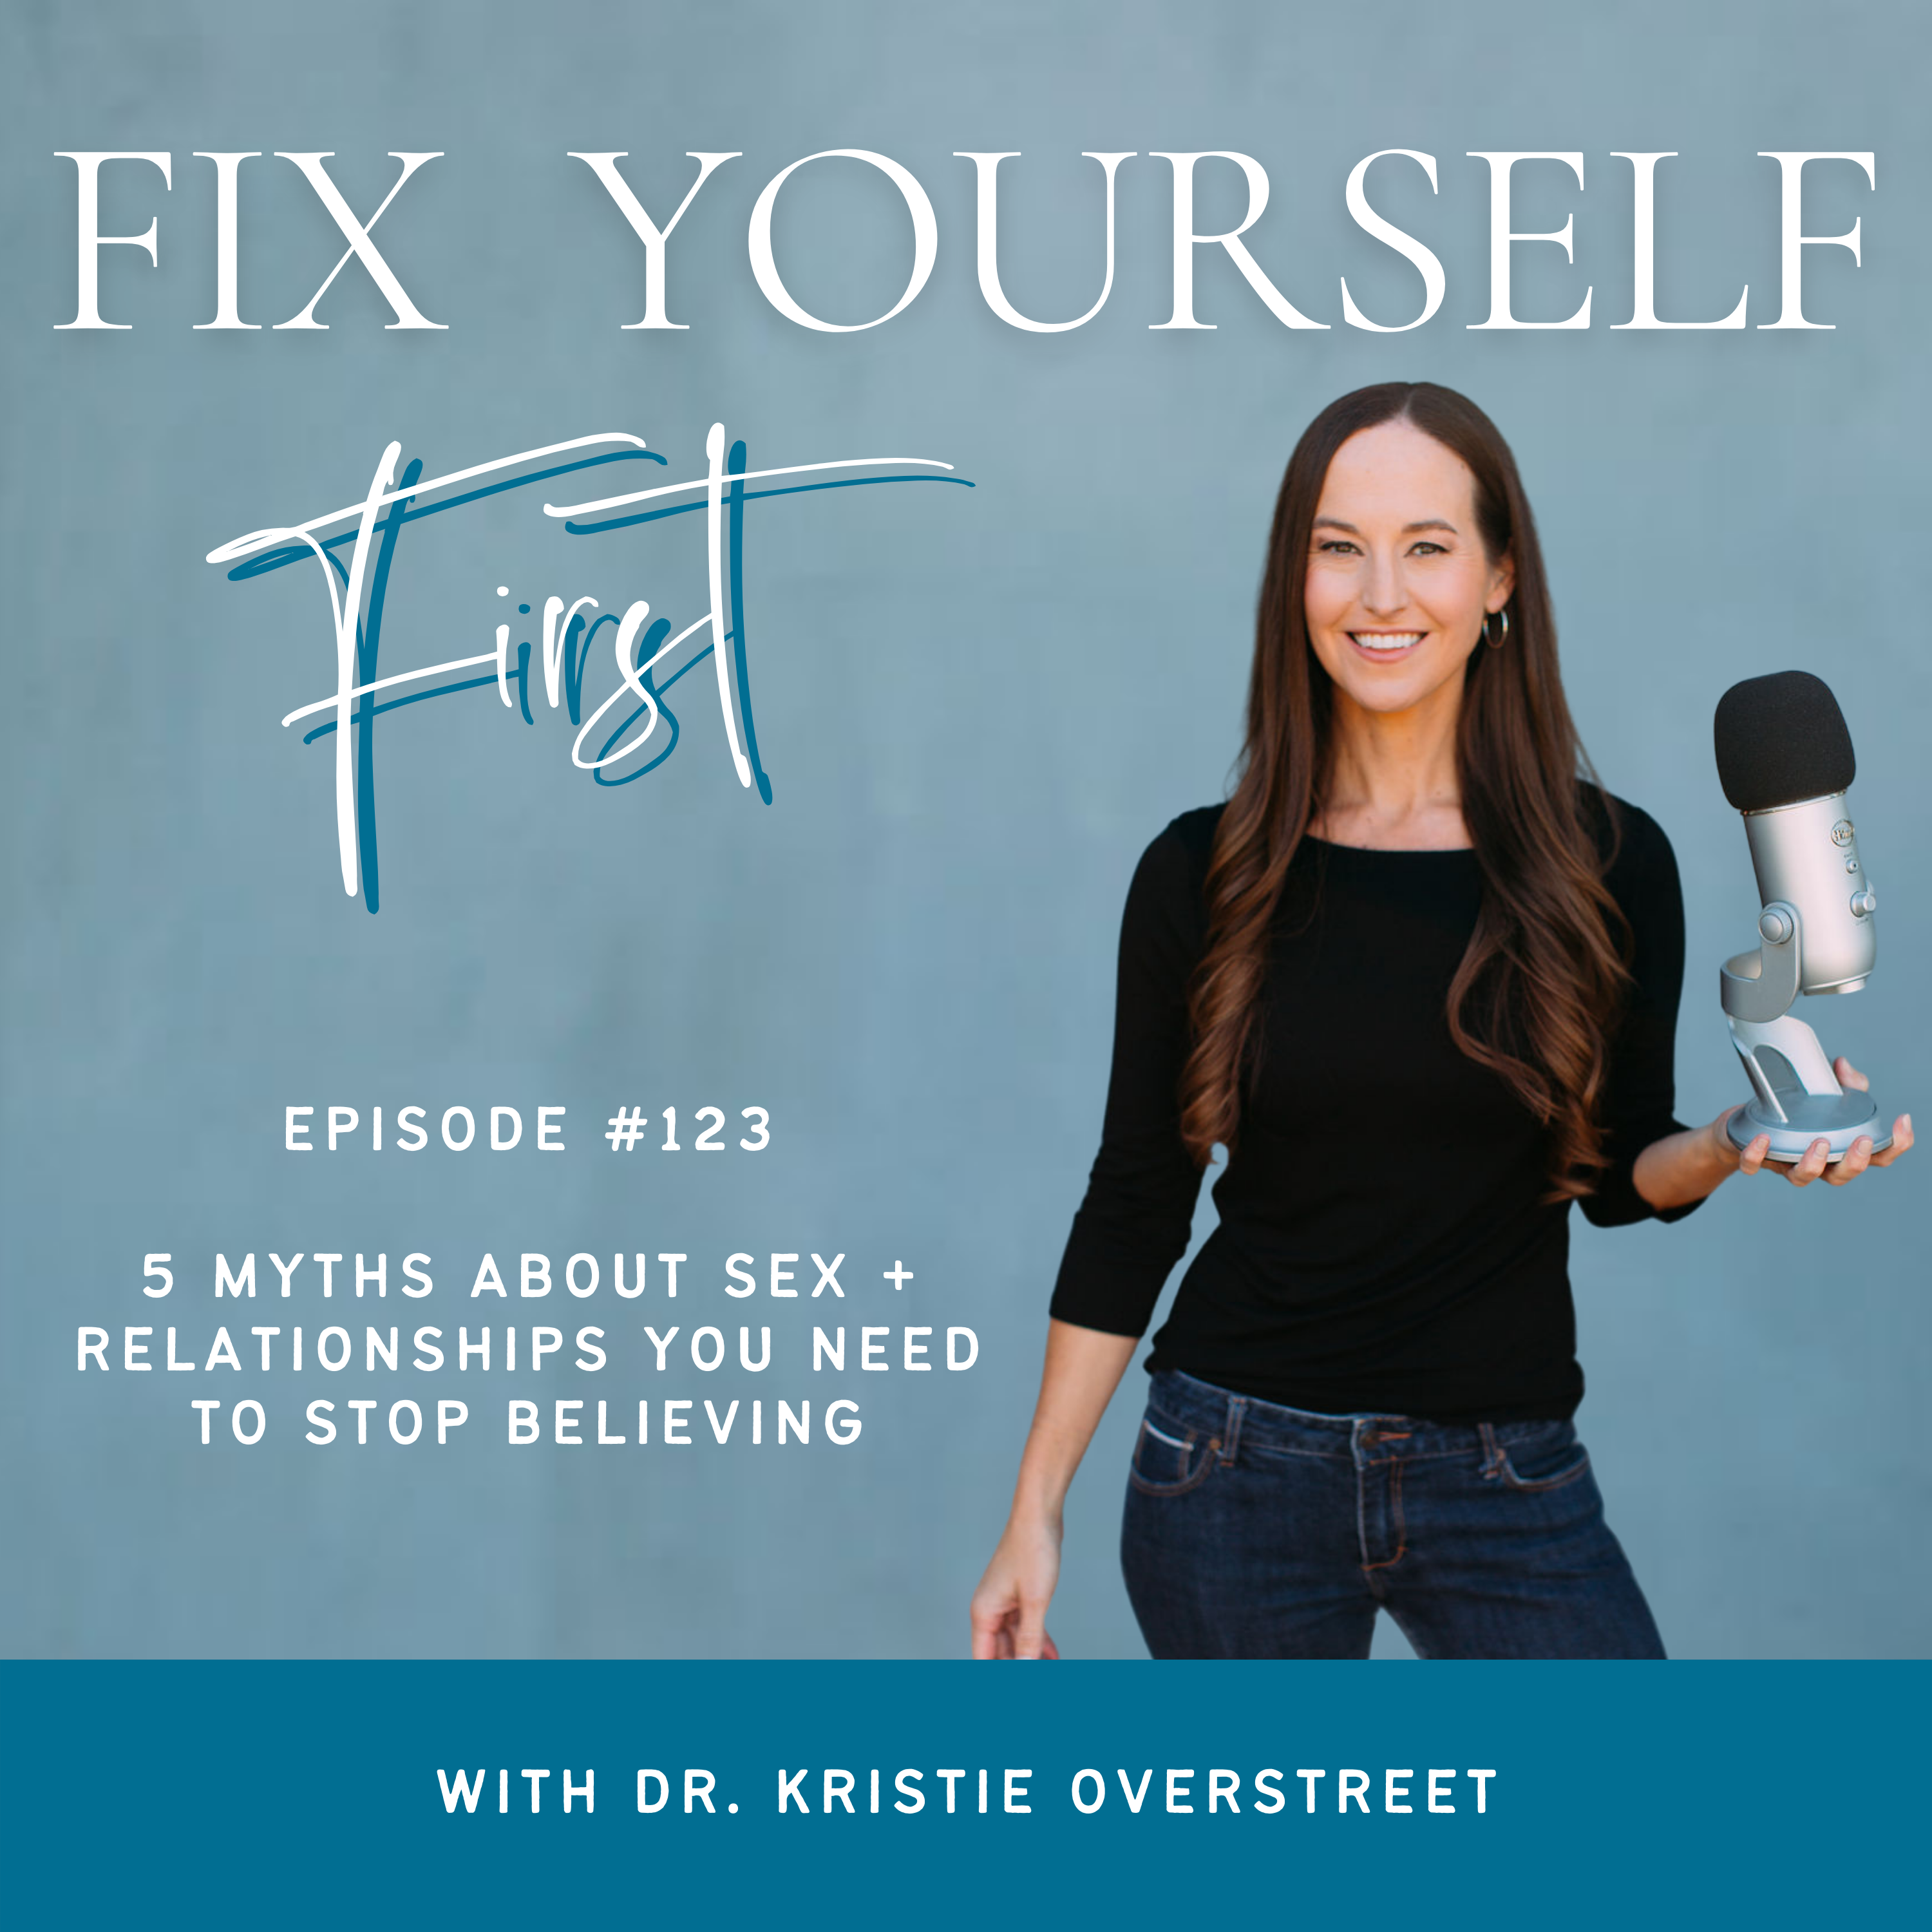 Fix Yourself First Episode 123 5 Myths About Sex + Relationships You Need to Stop Believing